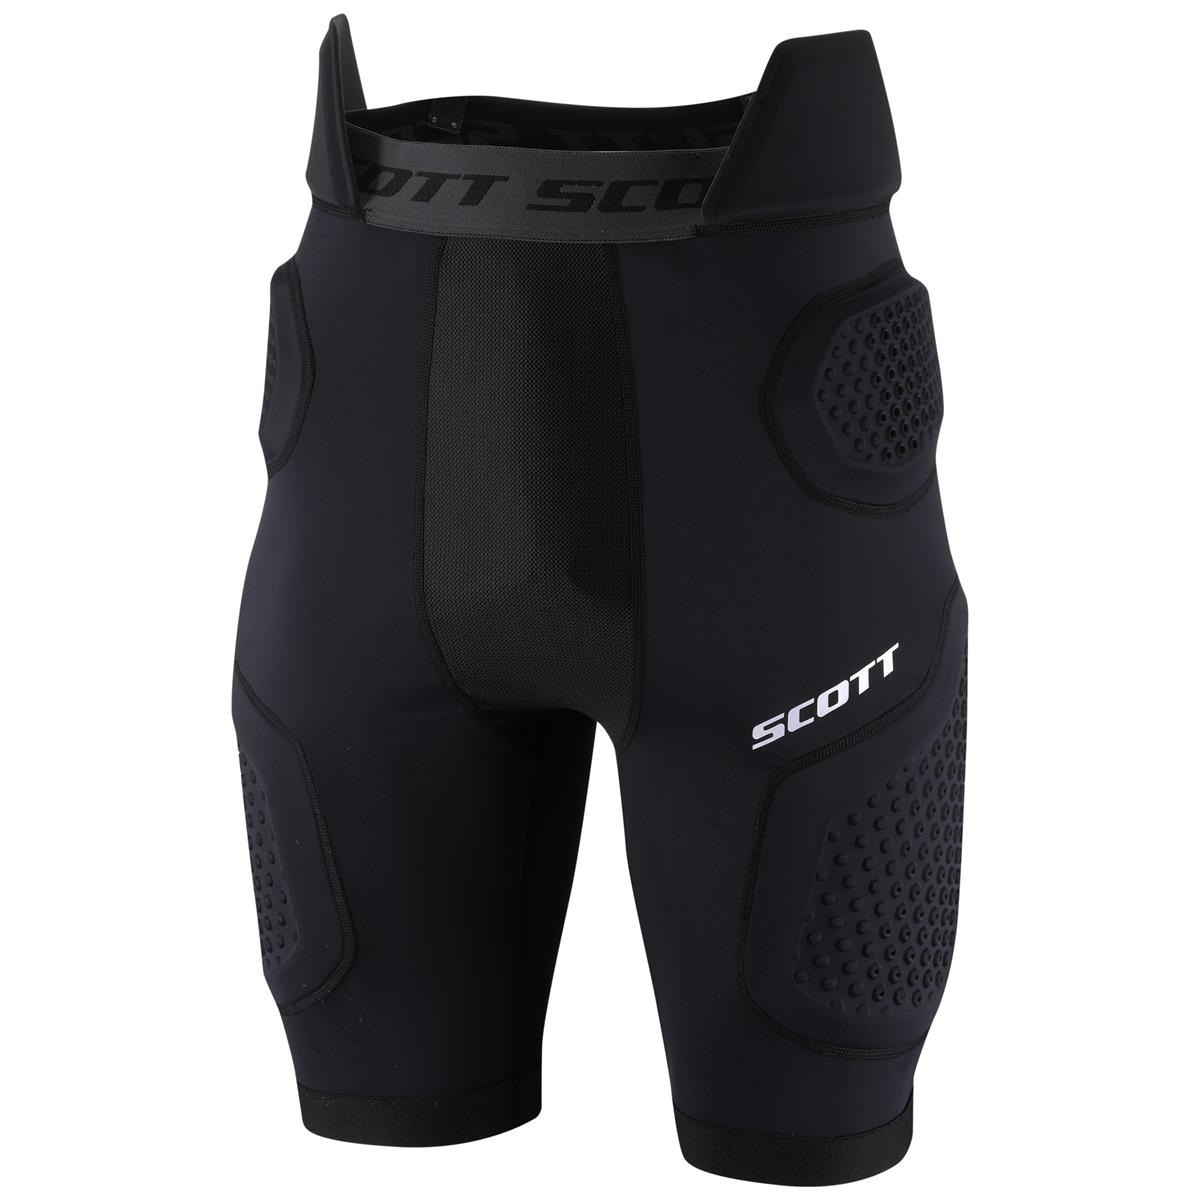 Short protector Softcon air black - Size L